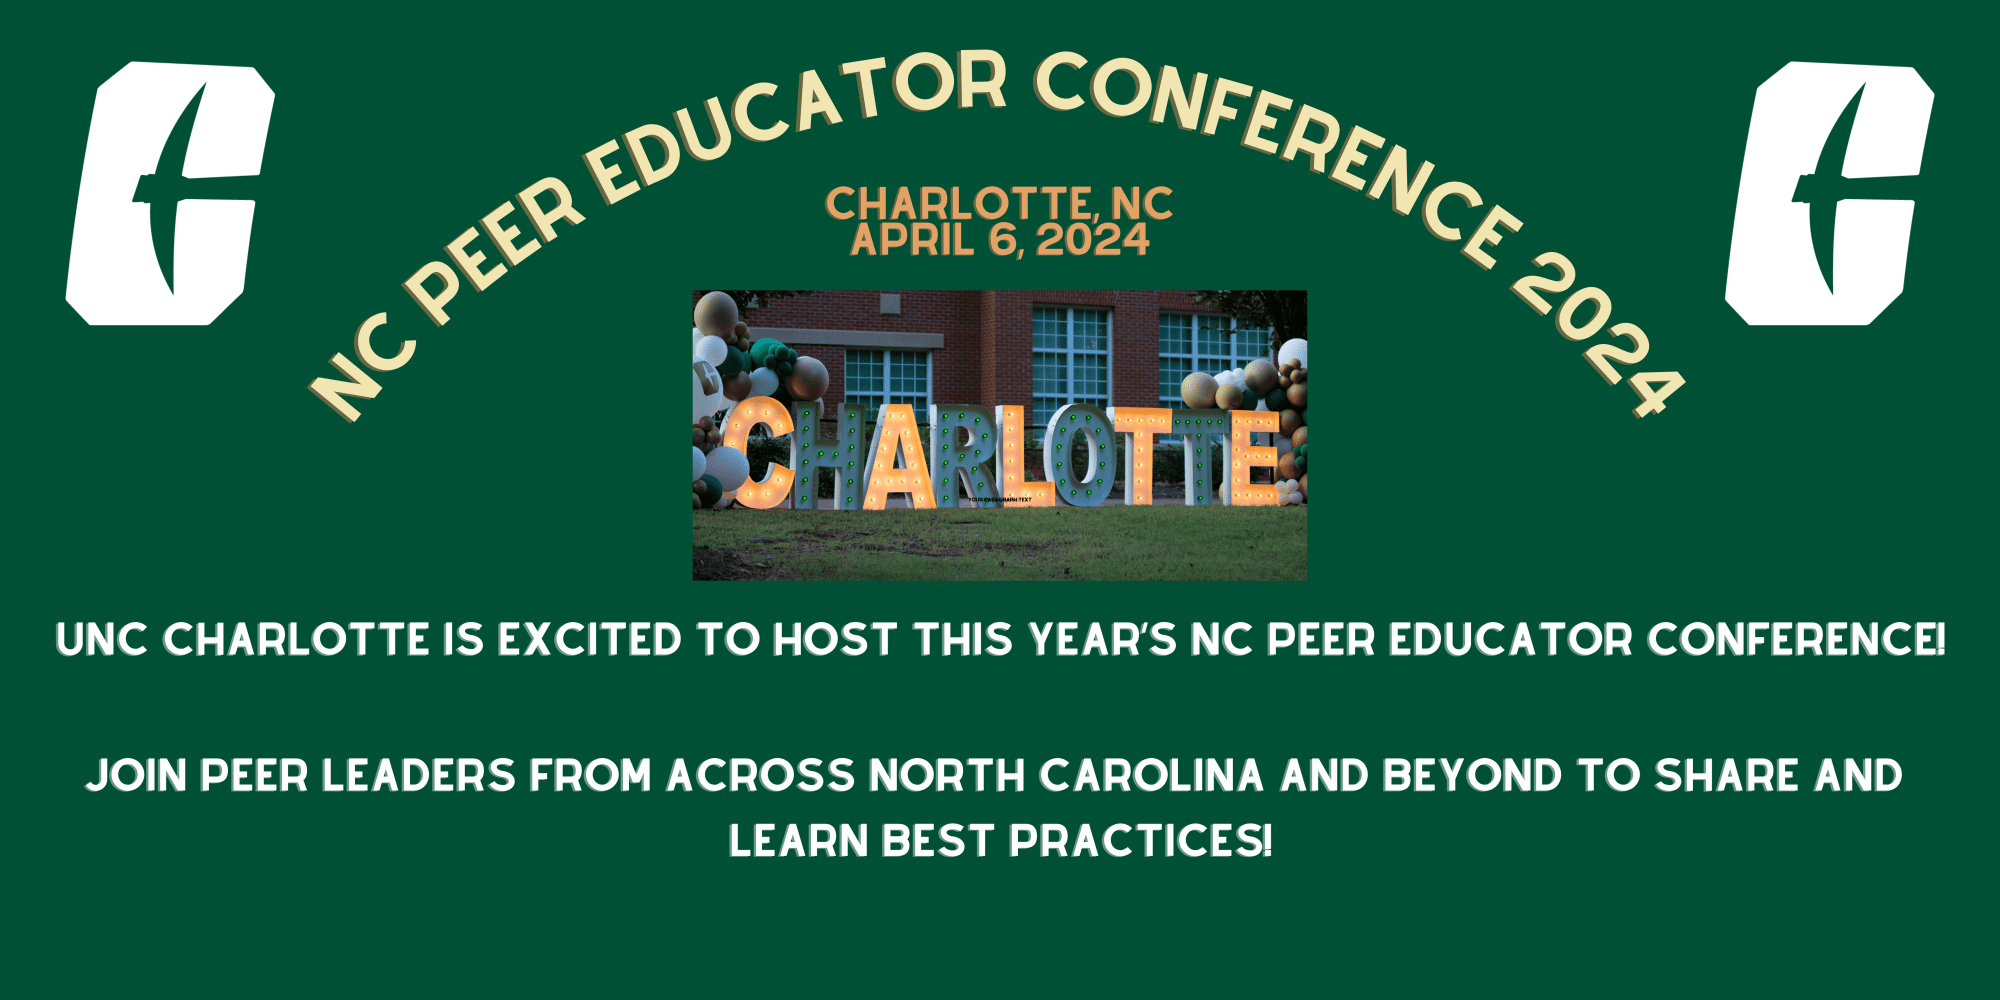 NC Peer Educator Conference 2024. UNC Charlotte is excited to host this year's NC Peer Educator Conference. Join Peer Leaders from across North Carolina and beyond to Share and Learn about best practices.